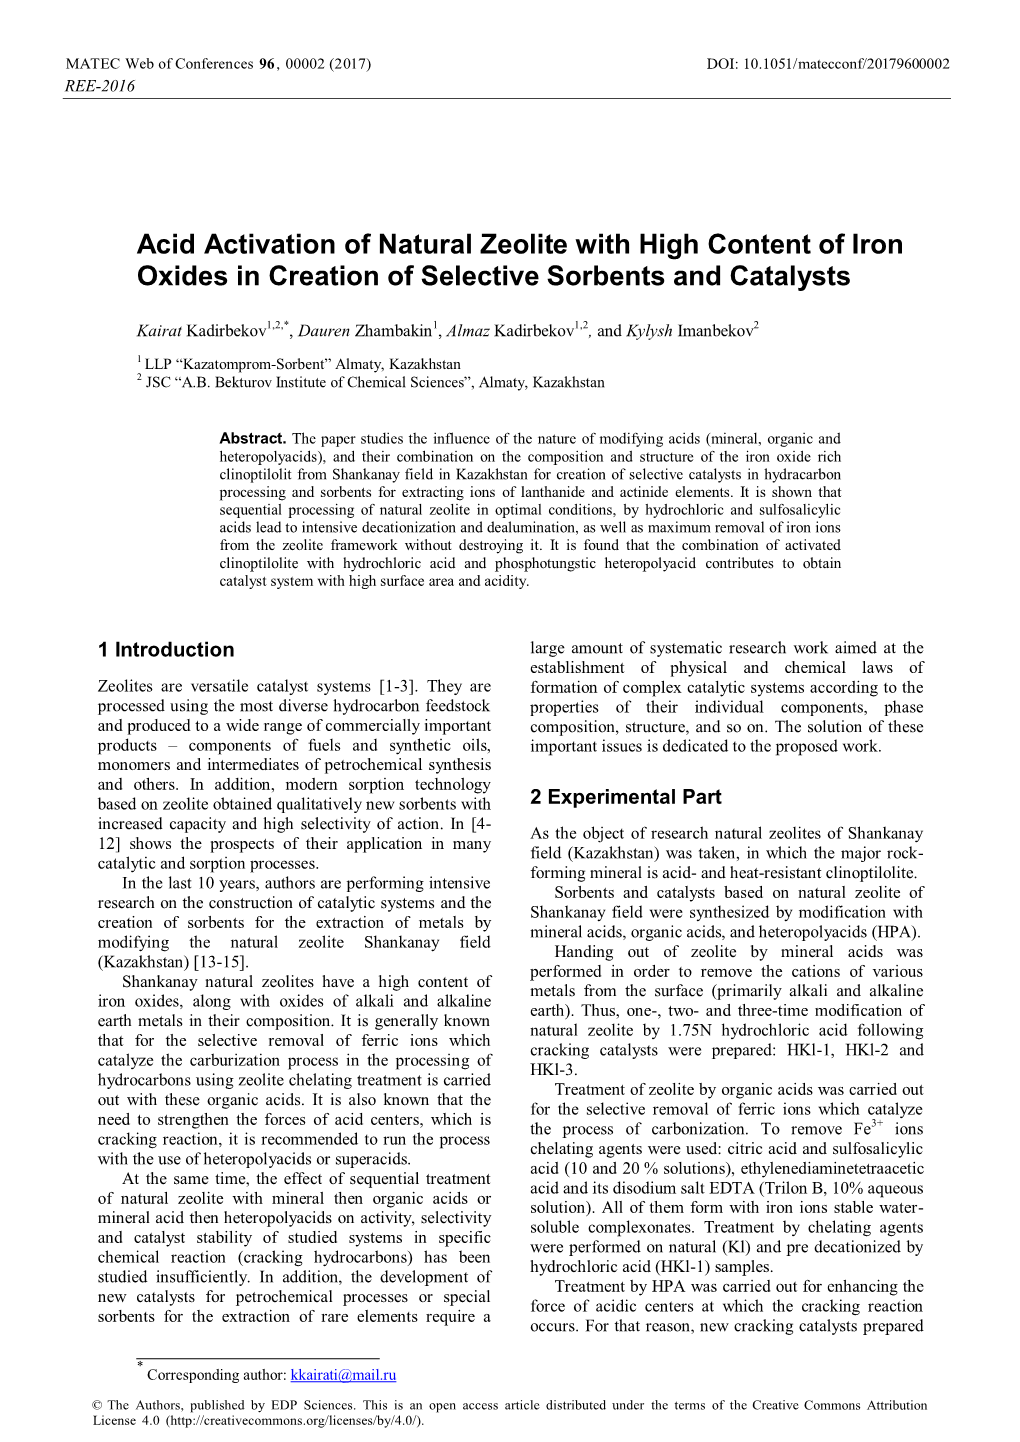 Acid Activation of Natural Zeolite with High Content of Iron Oxides in Creation of Selective Sorbents and Catalysts